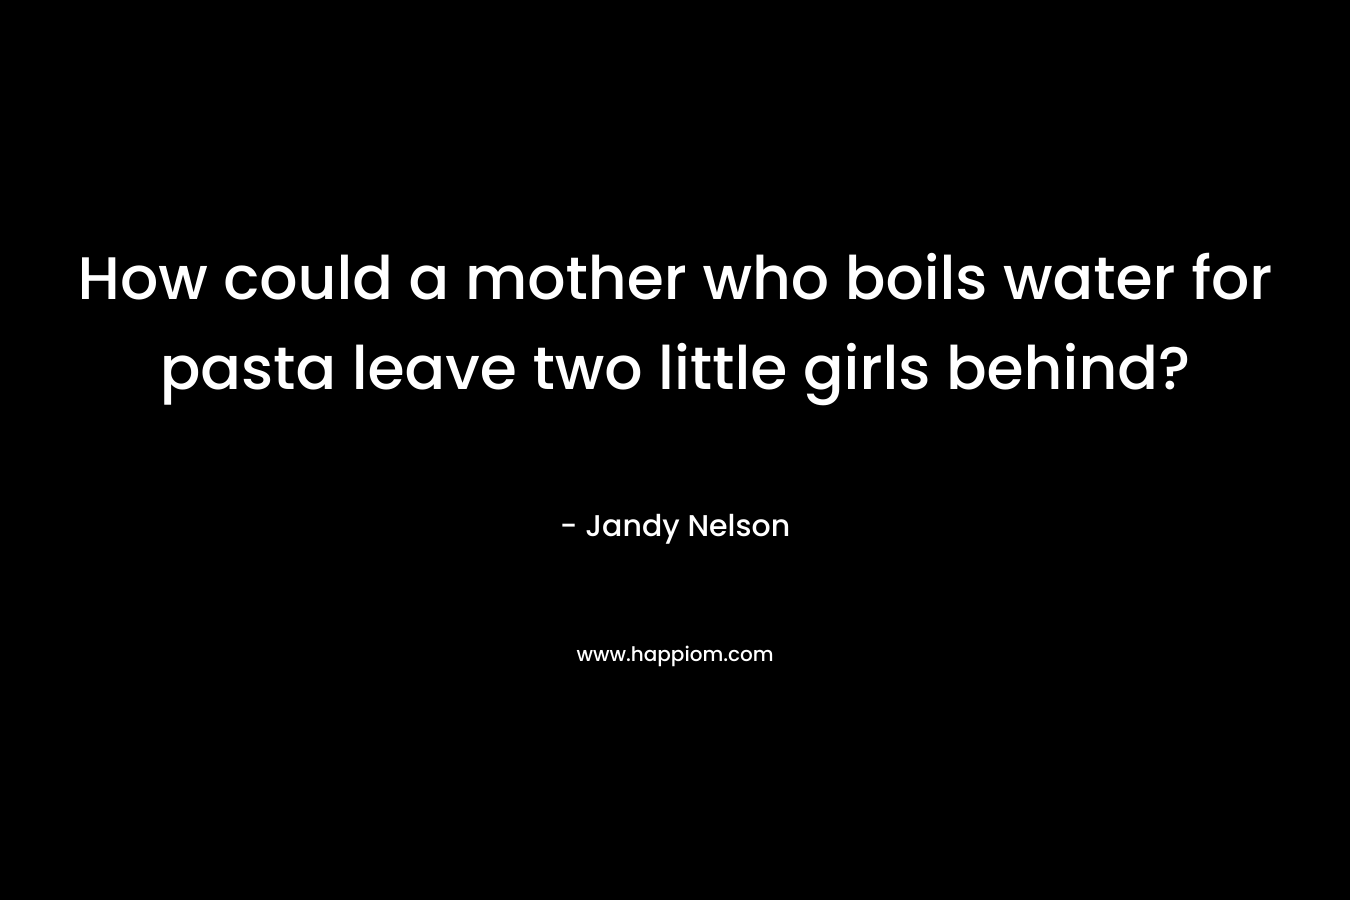 How could a mother who boils water for pasta leave two little girls behind?